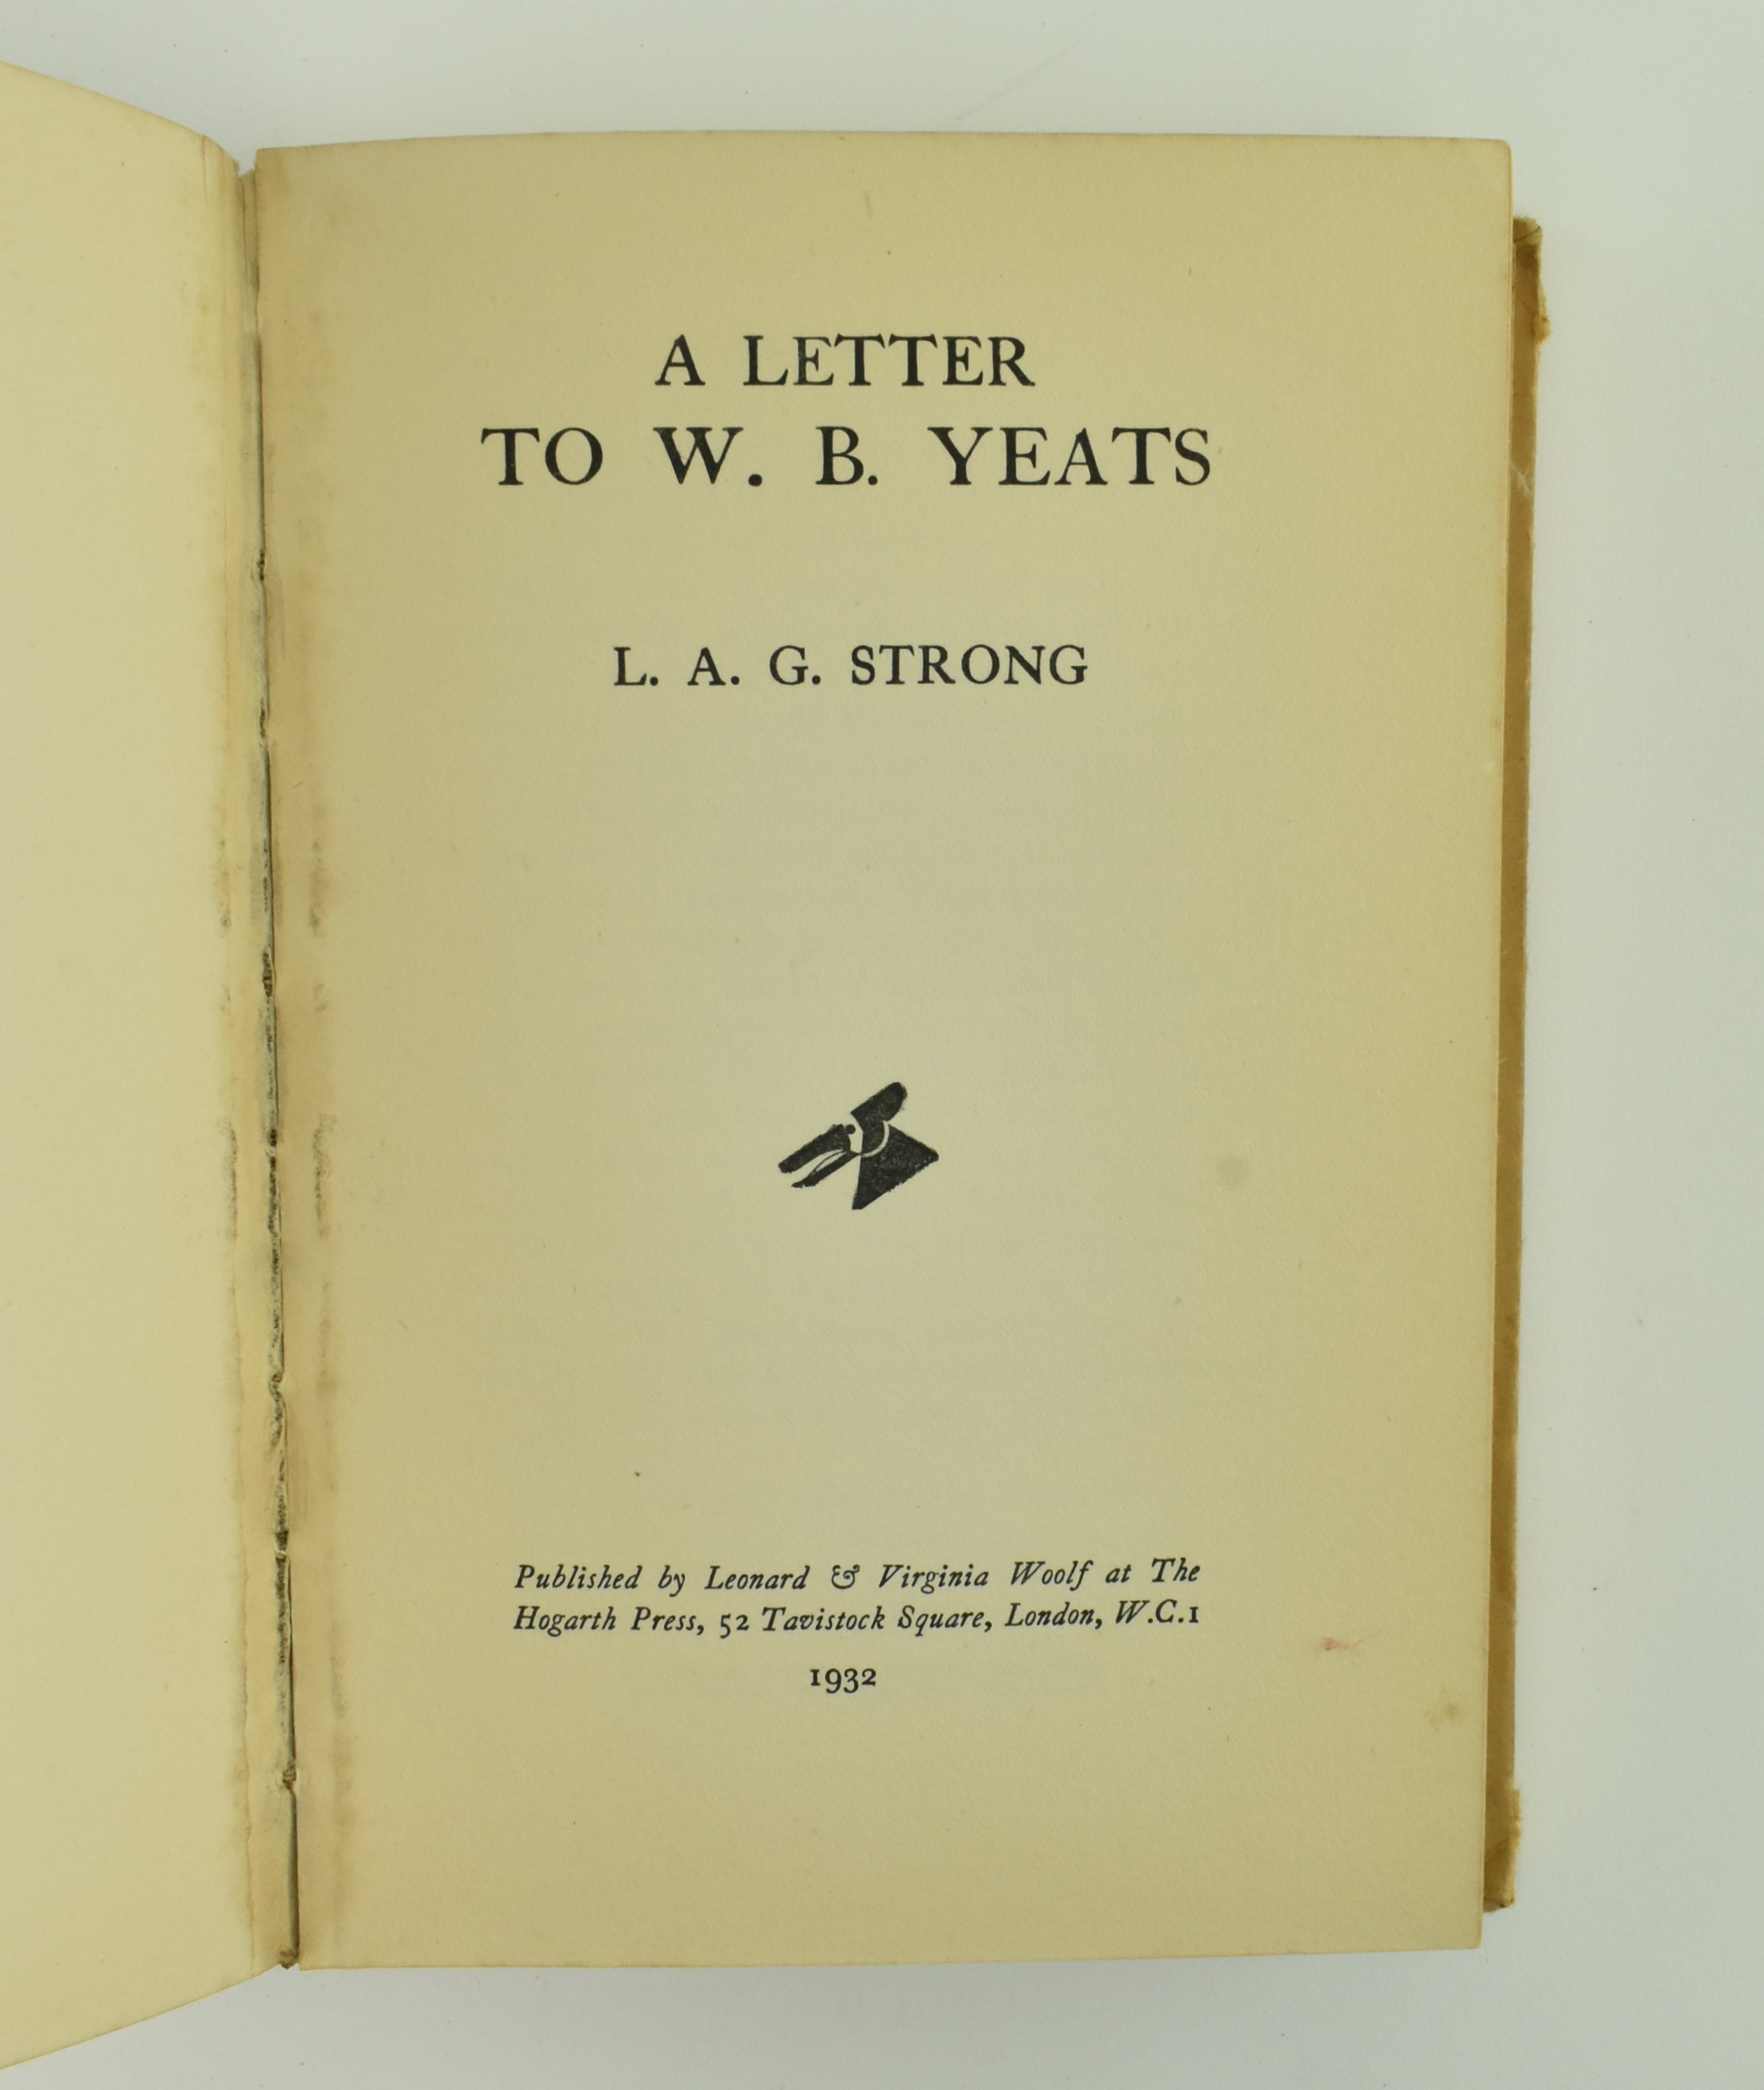 HOGARTH PRESS. 1933 THE HOGARTH LETTERS, ONE OF 500 COPIES - Image 6 of 7